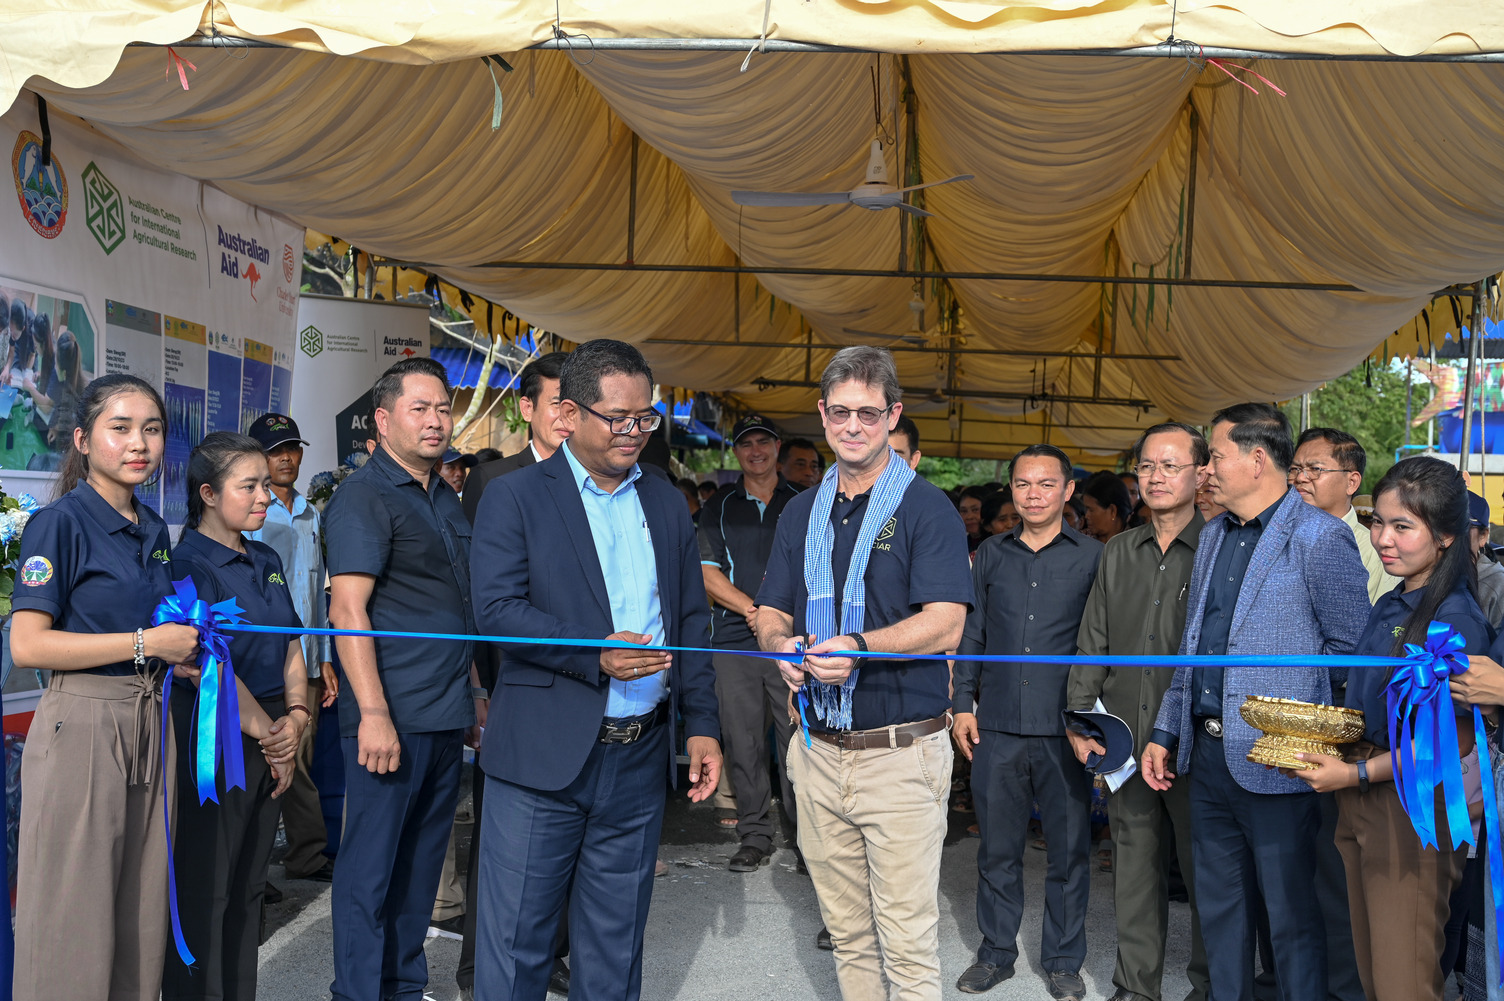 Australia's Ambassador to Cambodia, Mr Justin Whyatt, and Cambodian Secretary of State for the Ministry of Agriculture, Forestry, and Fisheries, Mr Khun Savoeun, cut the ribbon to open the Sleng Fishway.